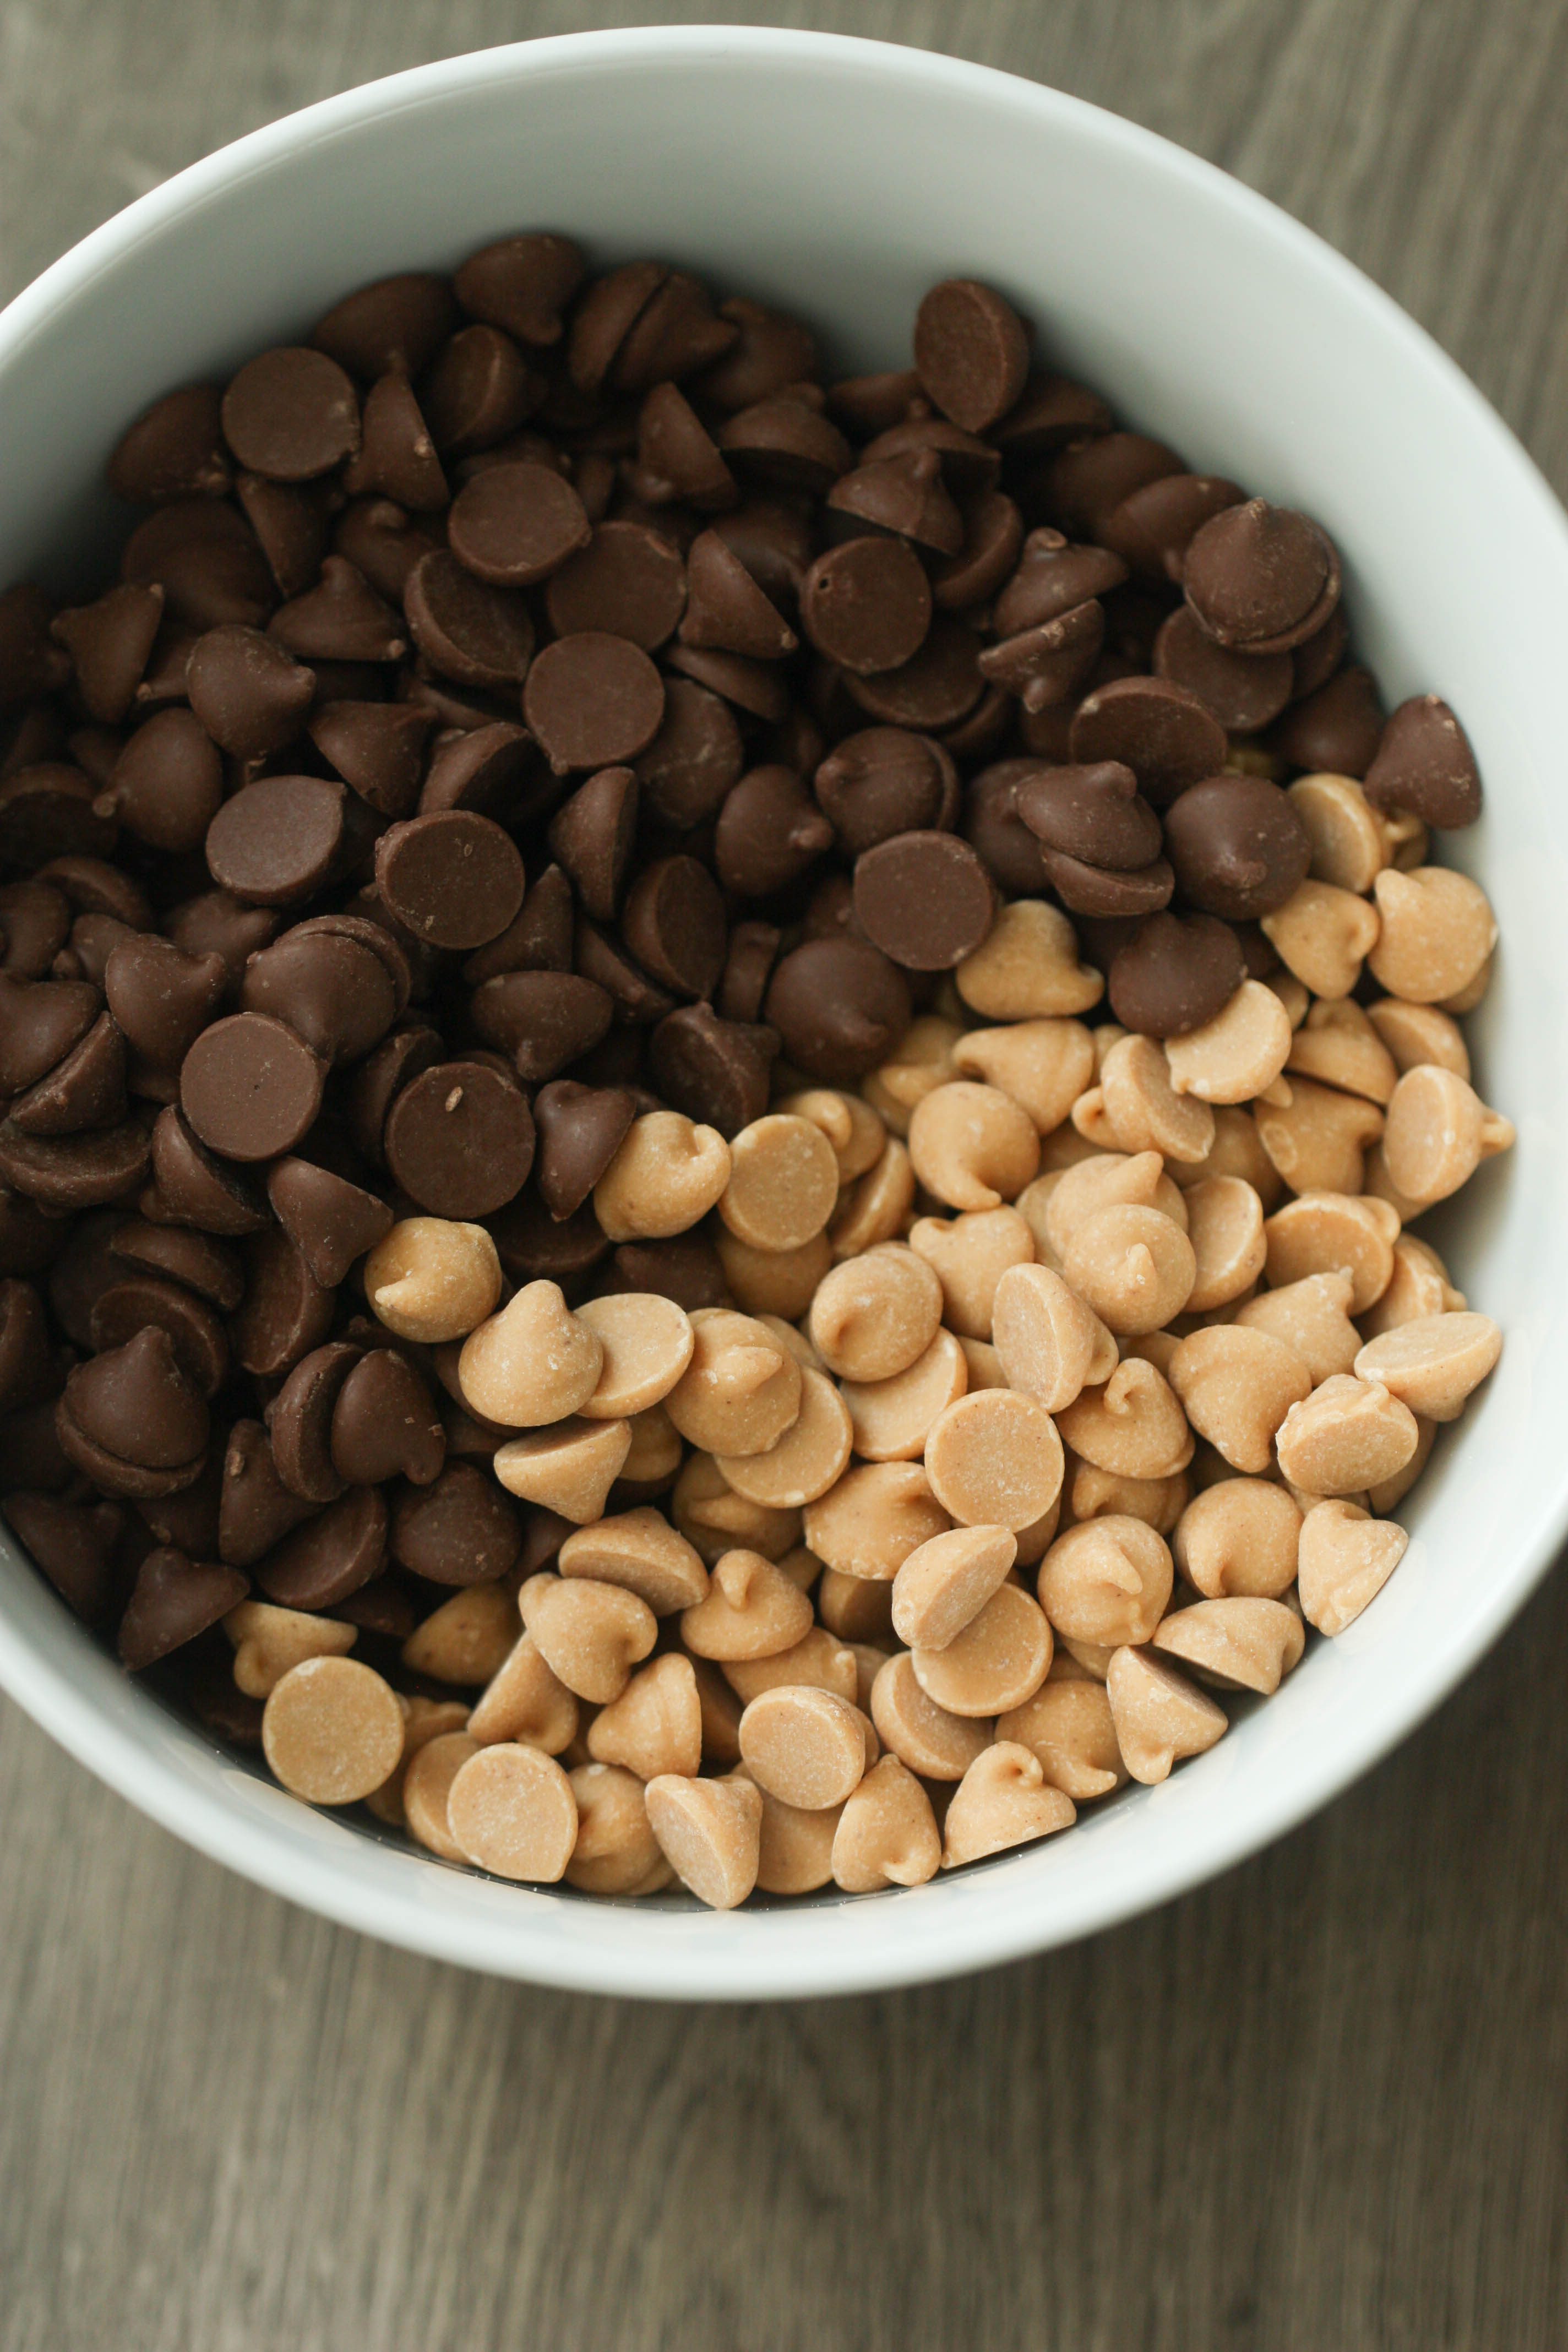 Peanut butter chips and chocolate chips in a microwave safe bowl